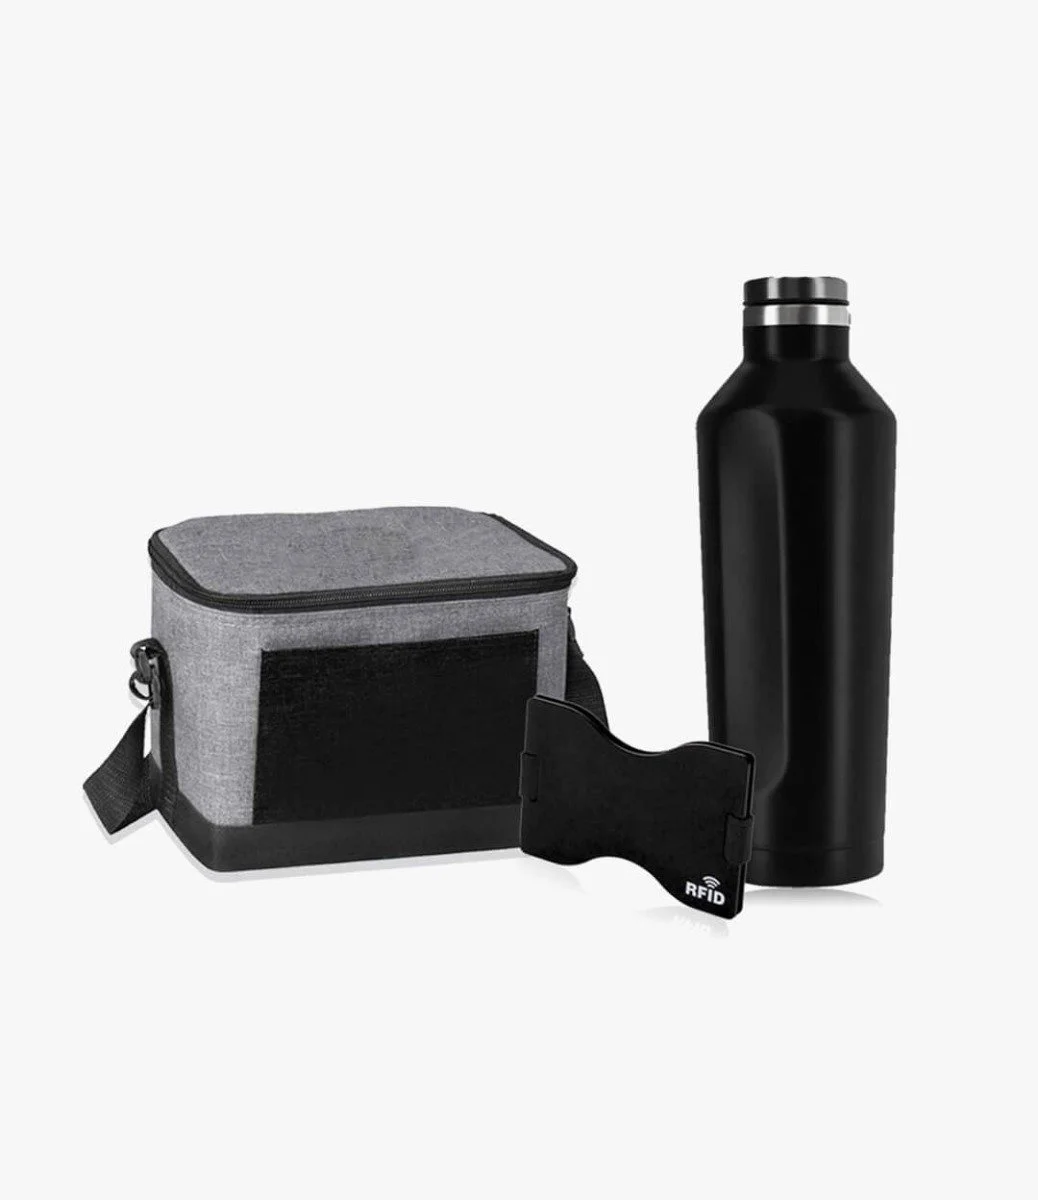 Lunch Bag & Water Bottle Gift Set by Jasani